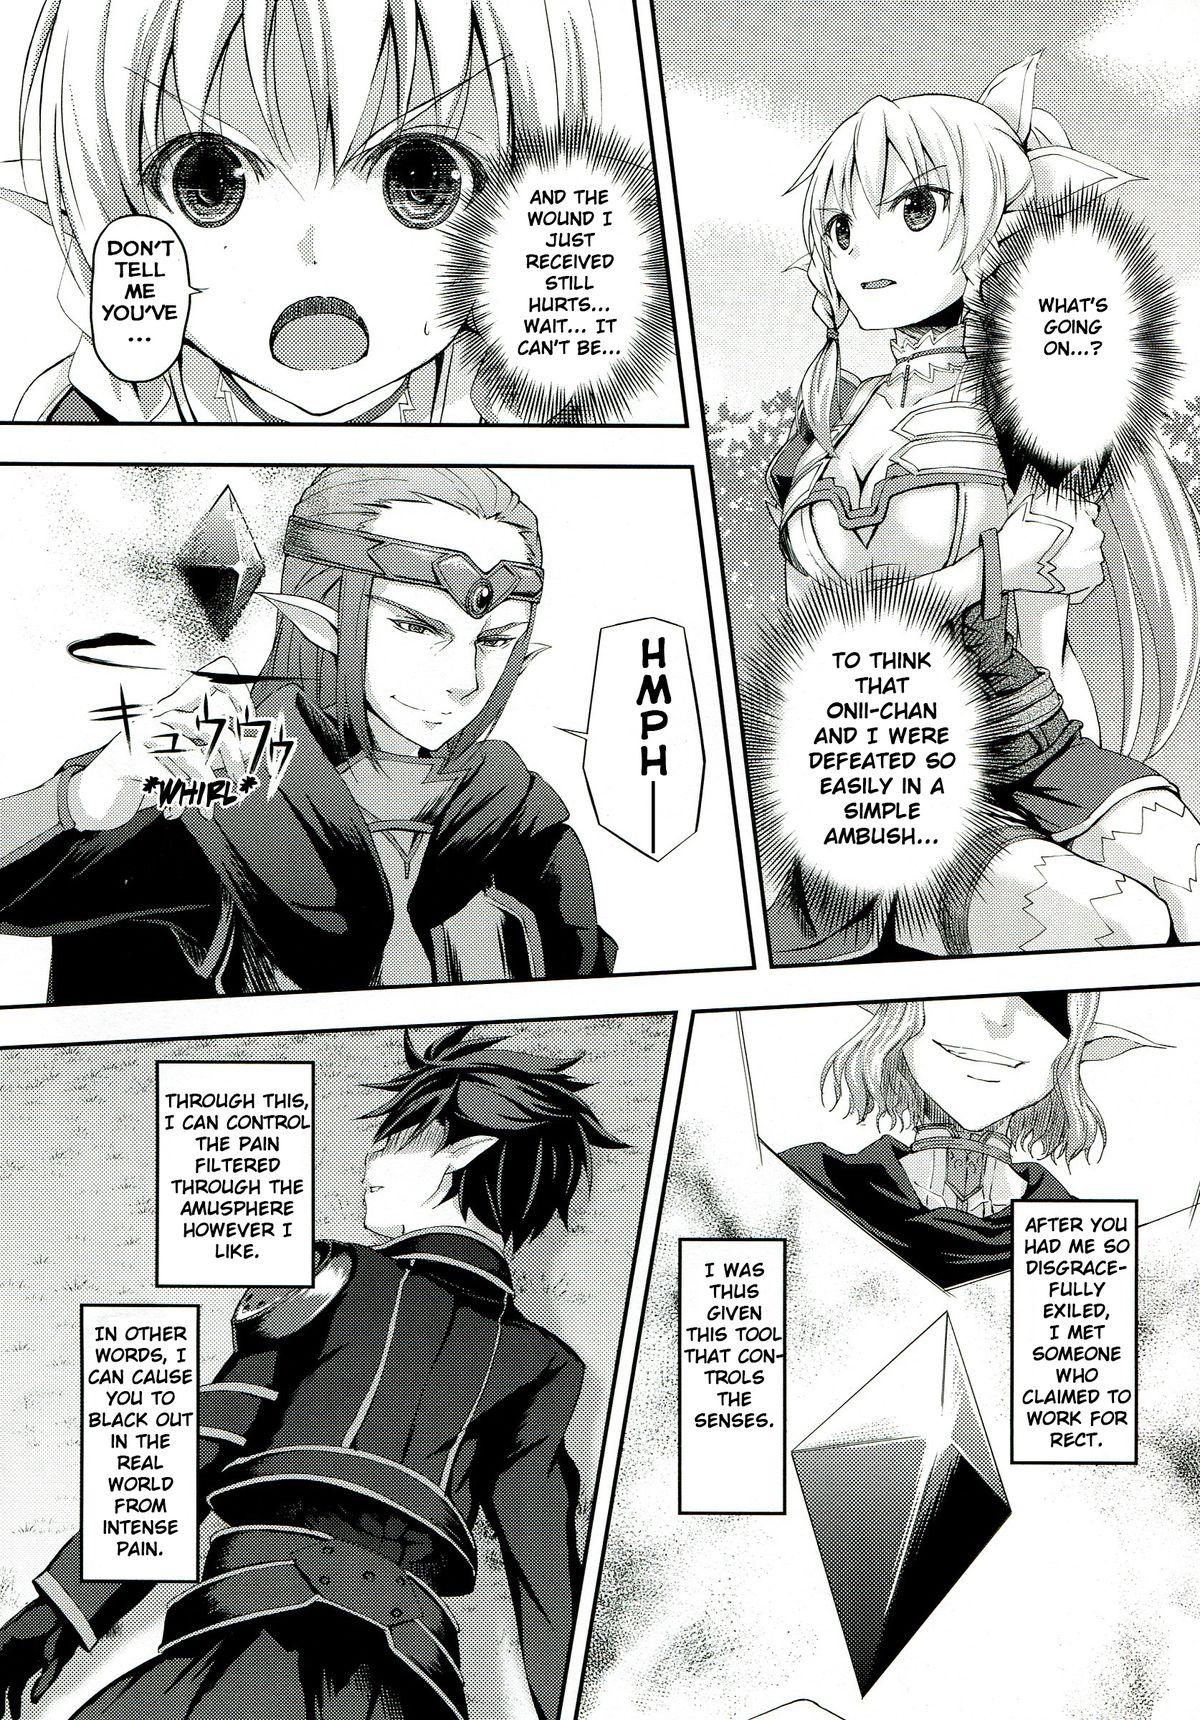 Housewife SISTER FAERIE - Sword art online Rola - Page 6